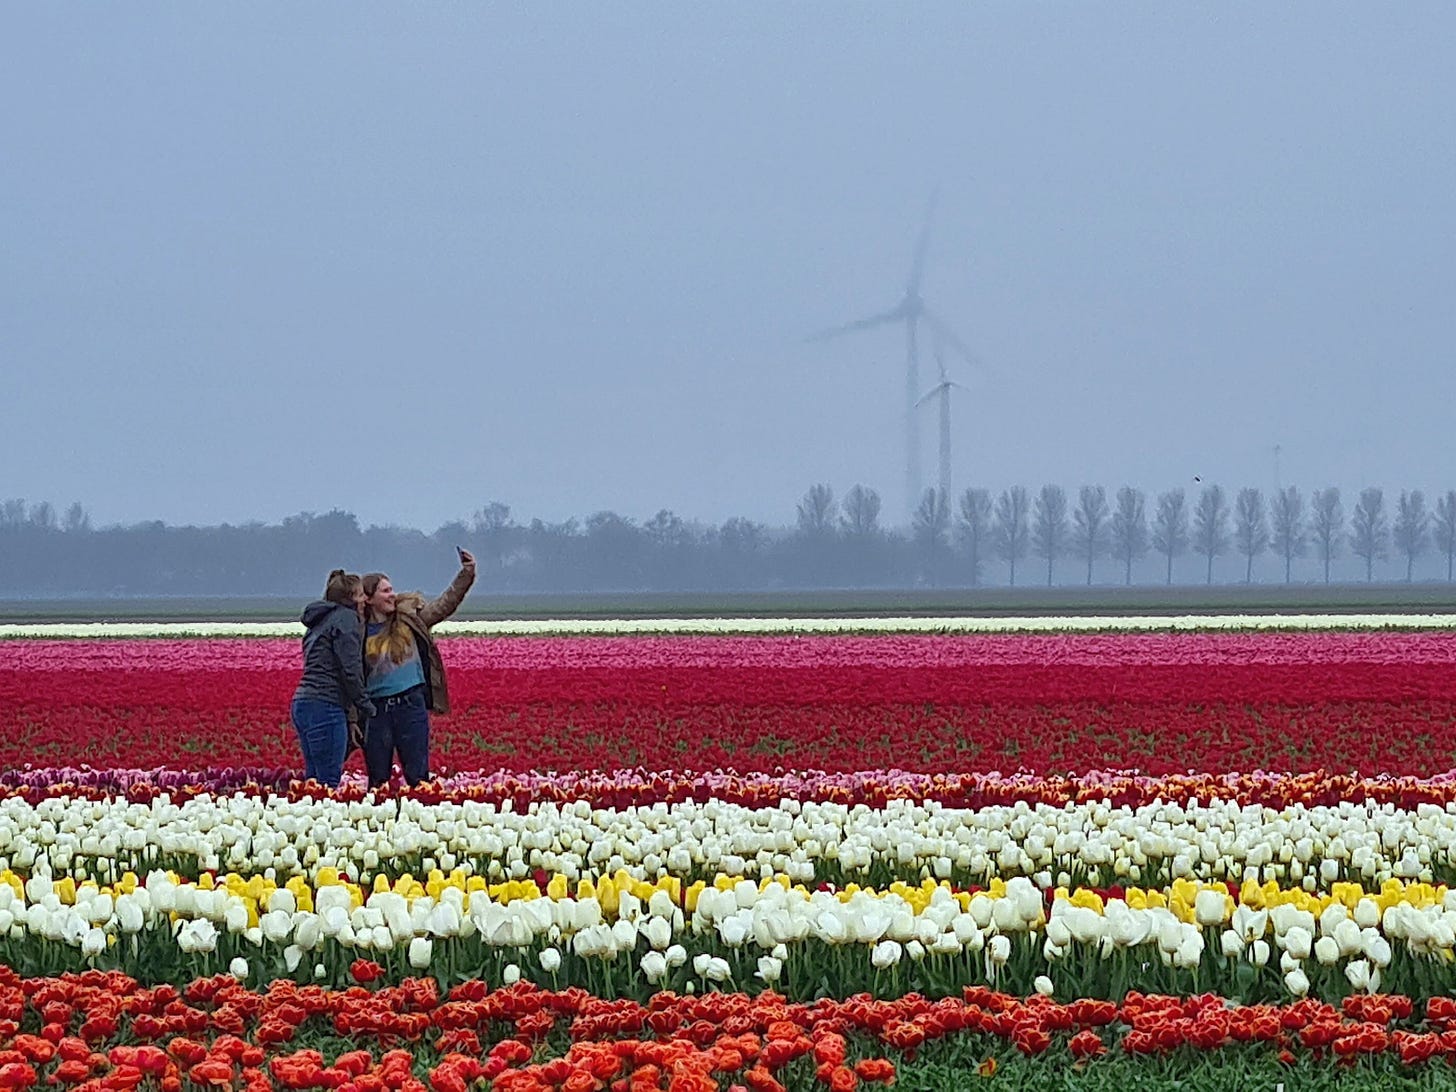 In a field of rows of bright multi-colored tulips, 2 young women pose for a selfie.